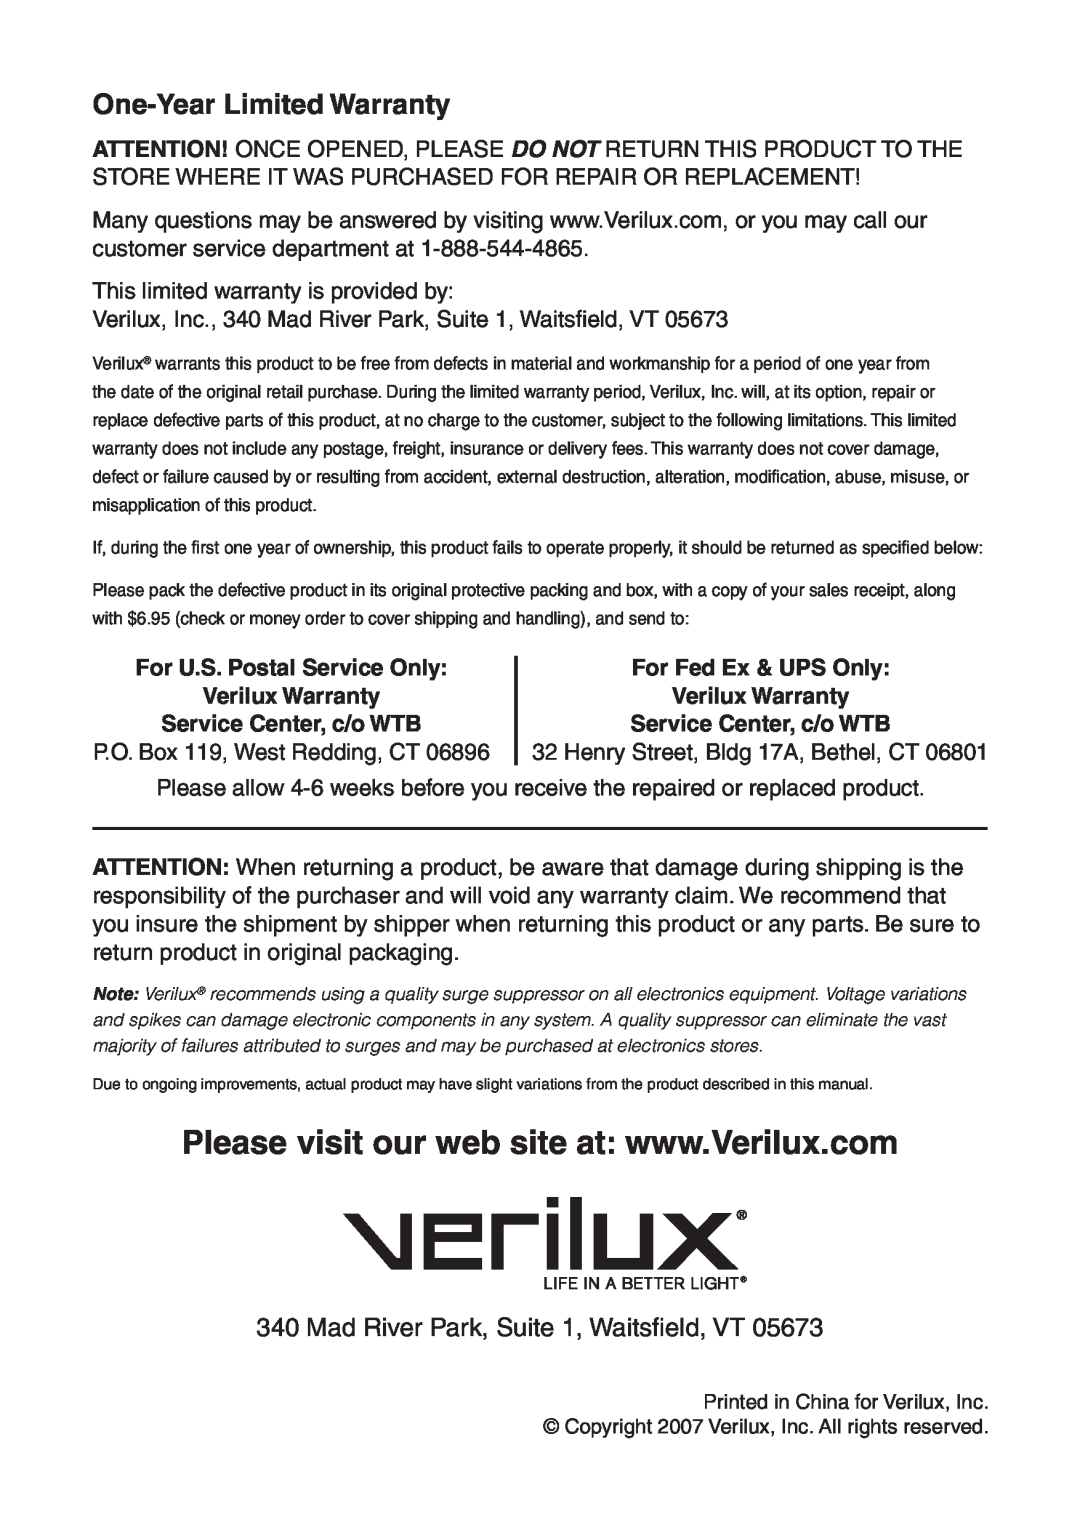 Verilux VD017 manual One-YearLimited Warranty, Mad River Park, Suite 1, Waitsﬁeld, VT, Service Center, c/o WTB 